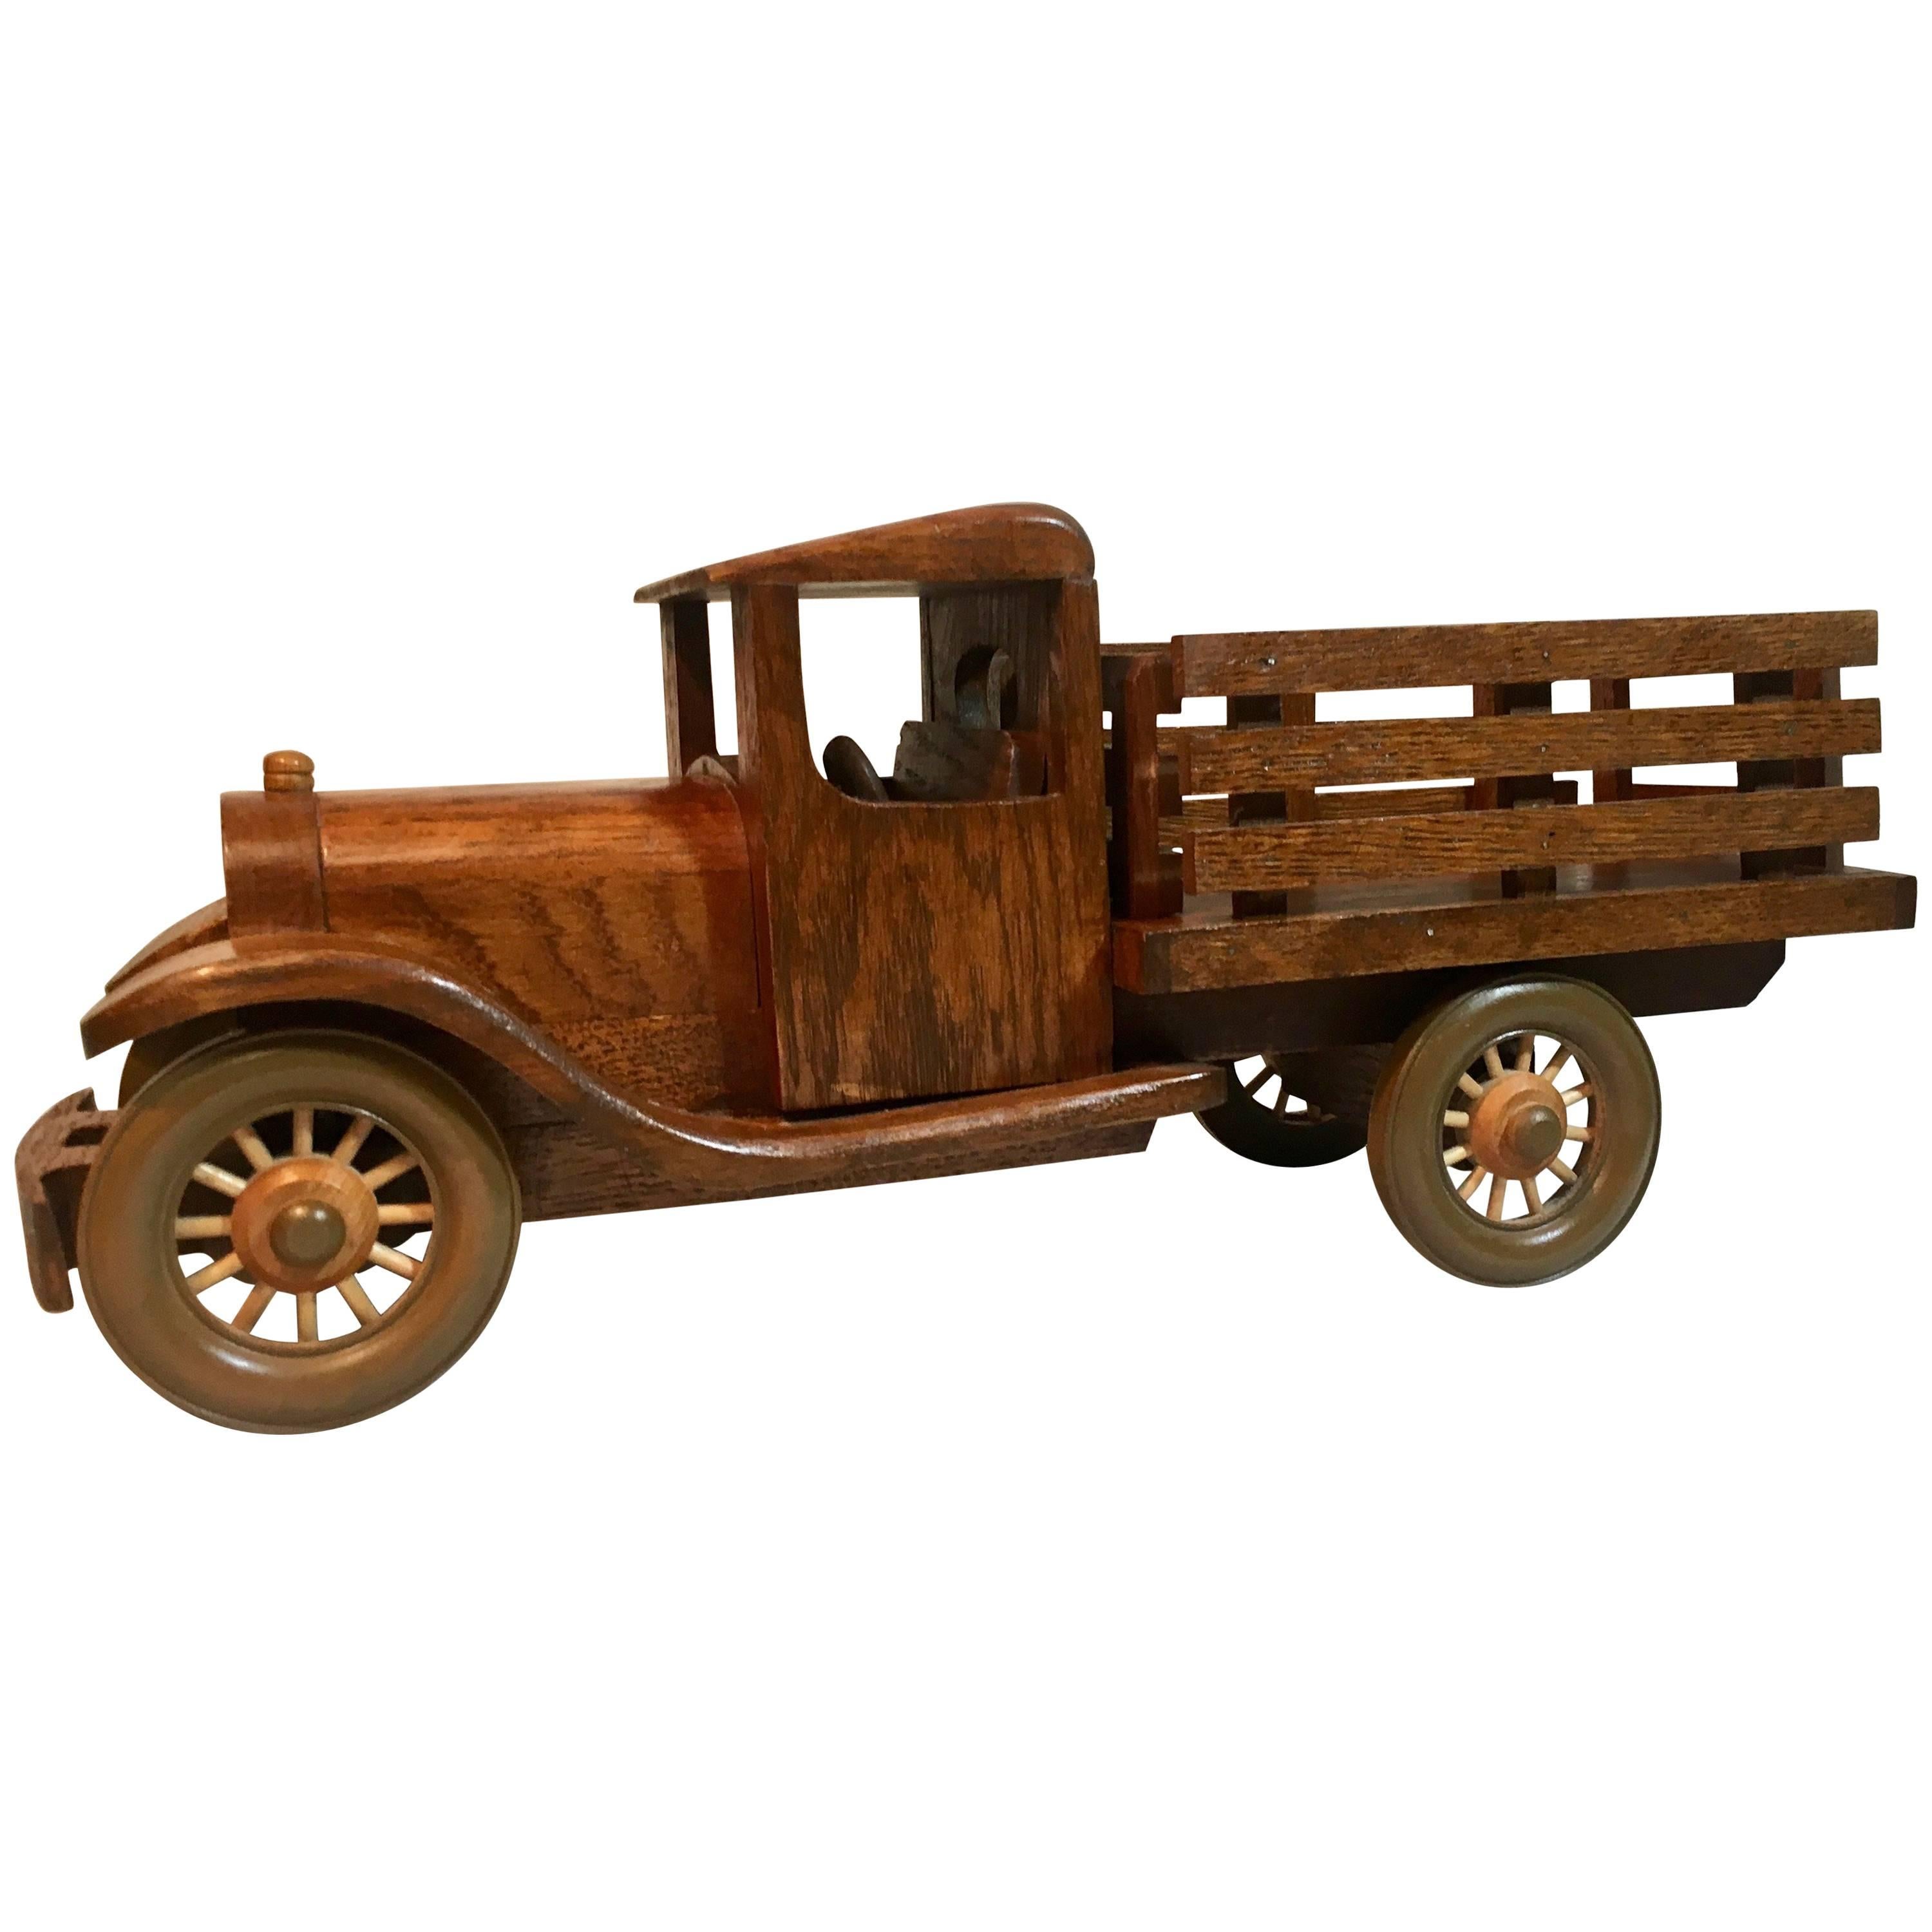 Signed Wooden Folk Art Truck with Removable Stakes